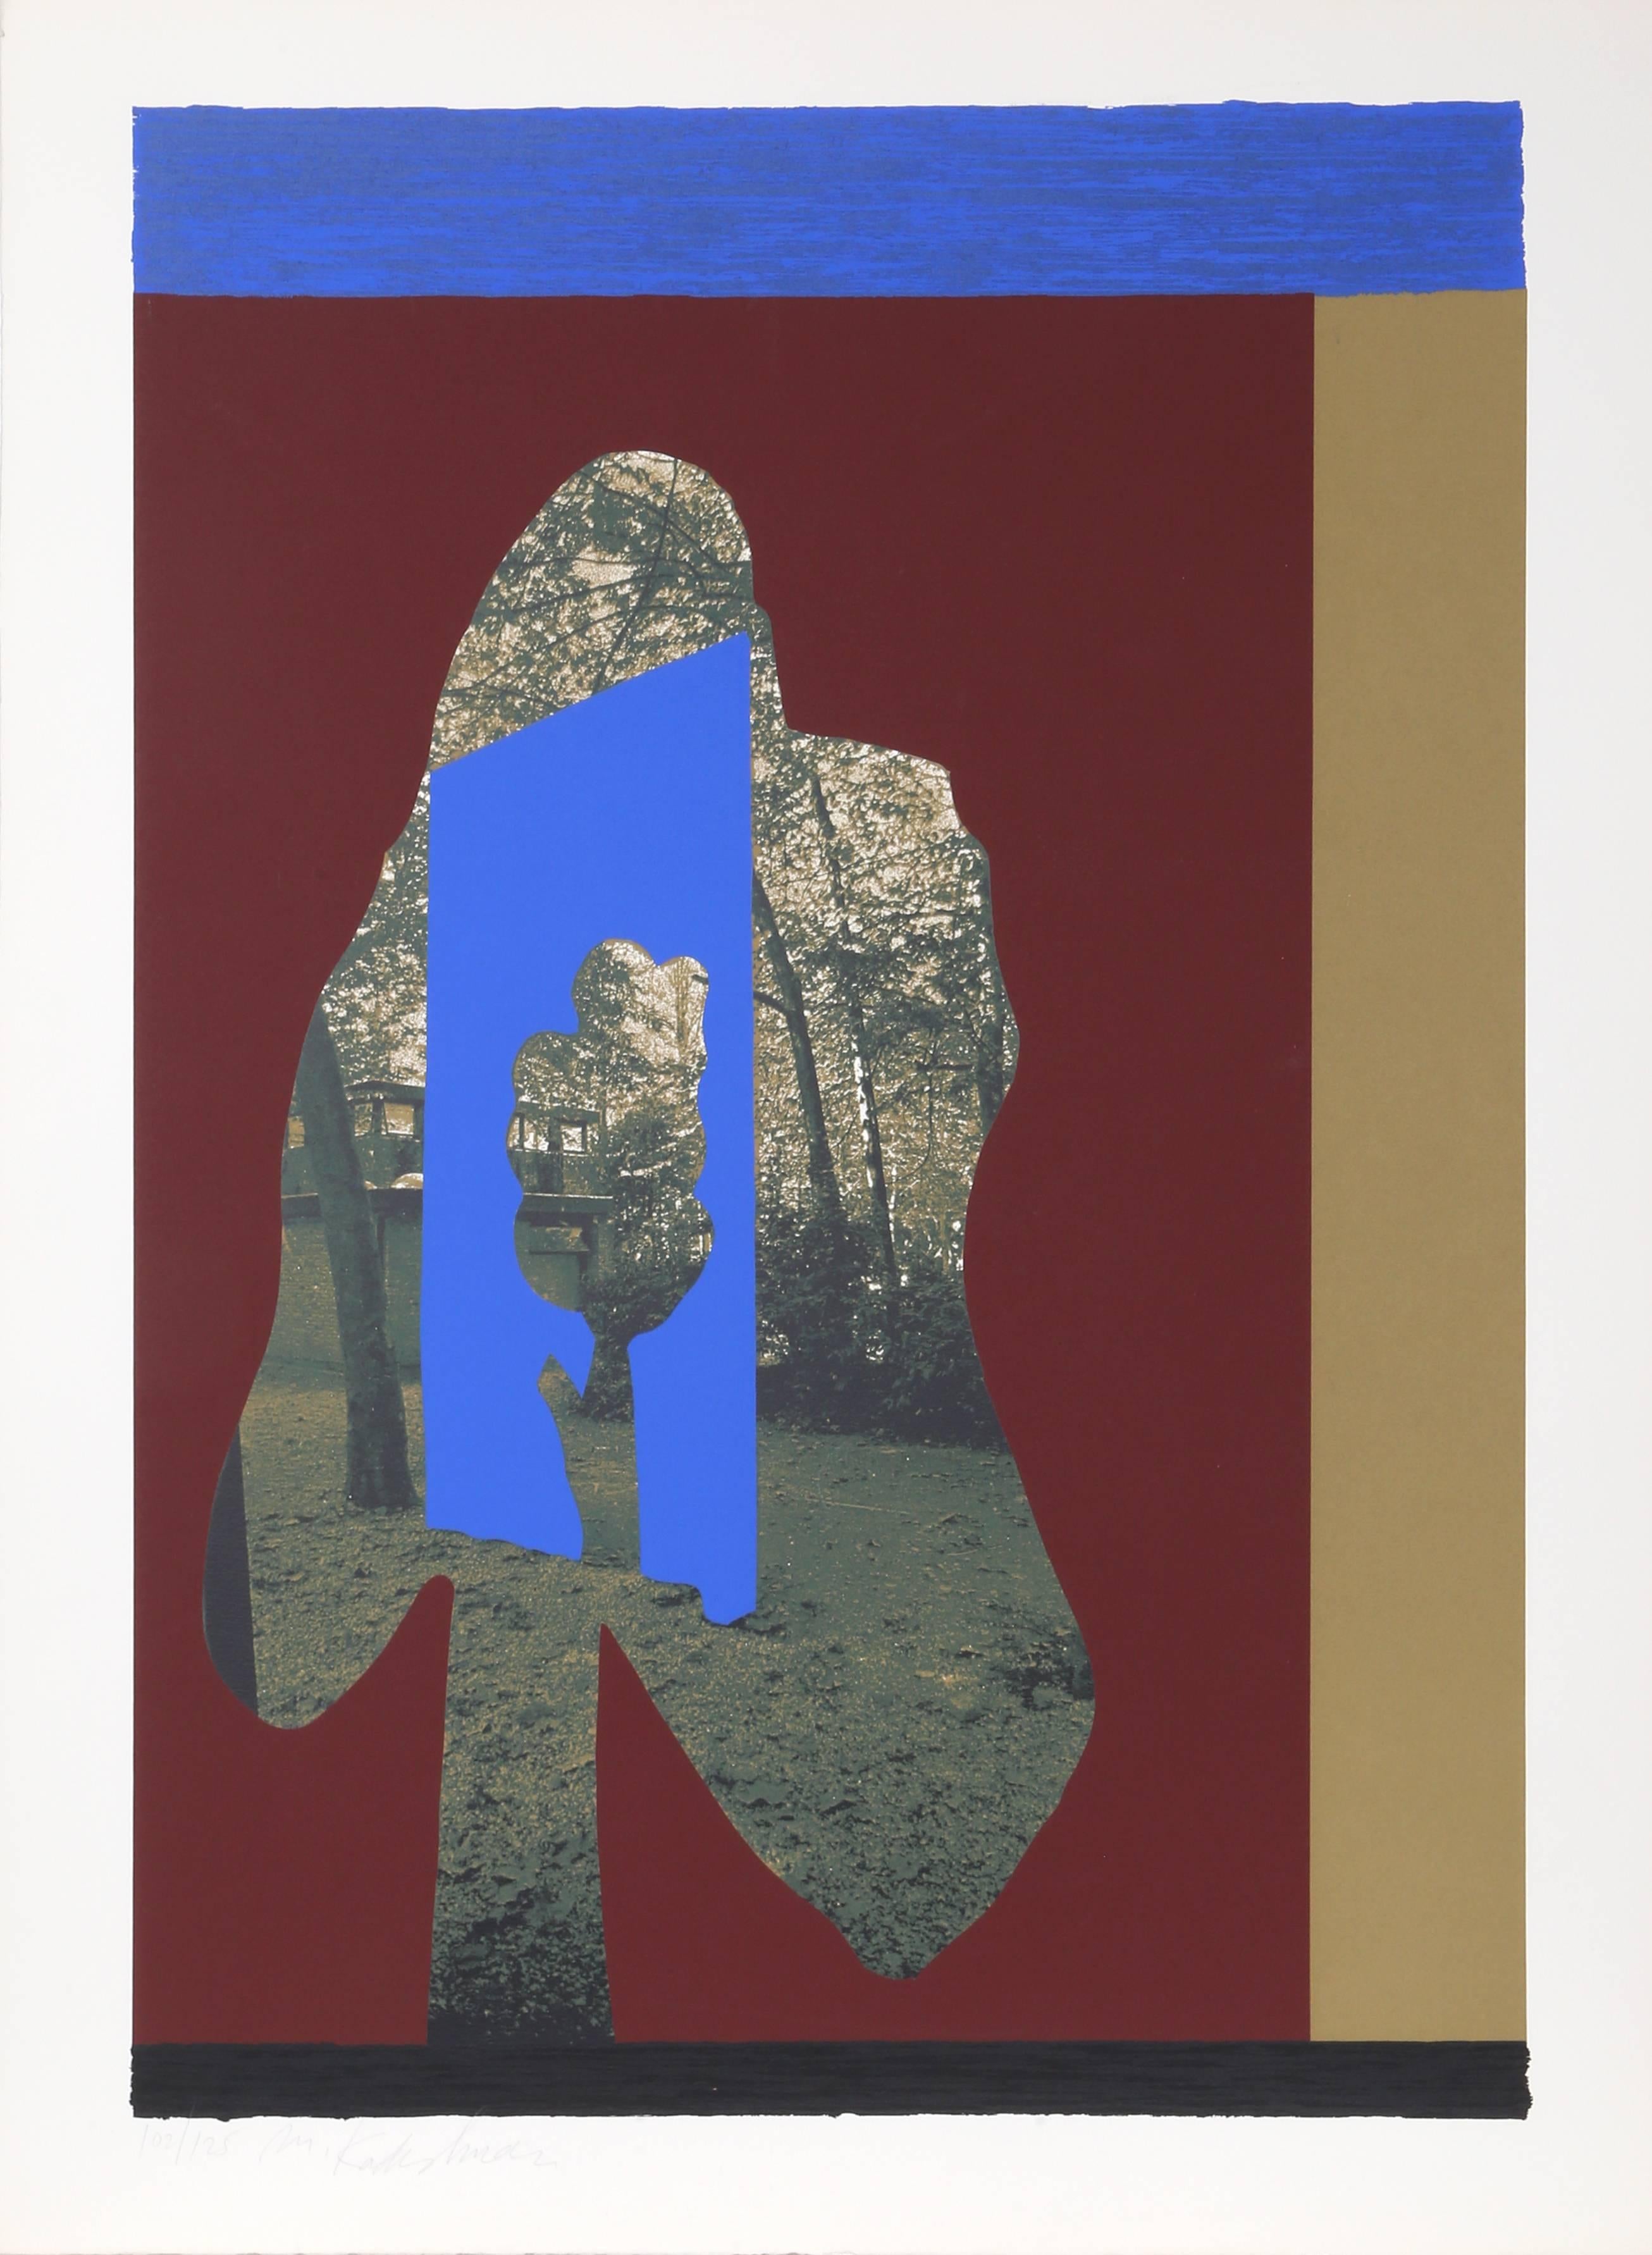 Artist:  Menashe Kadishman, Israeli (1932 - 2015)
Title:   Tree in Tree
Year:  1979
Medium:  Serigraph, signed and numbered in pencil
Edition:  125
Size:  41  x 30 in. (104.14  x 76.2 cm)